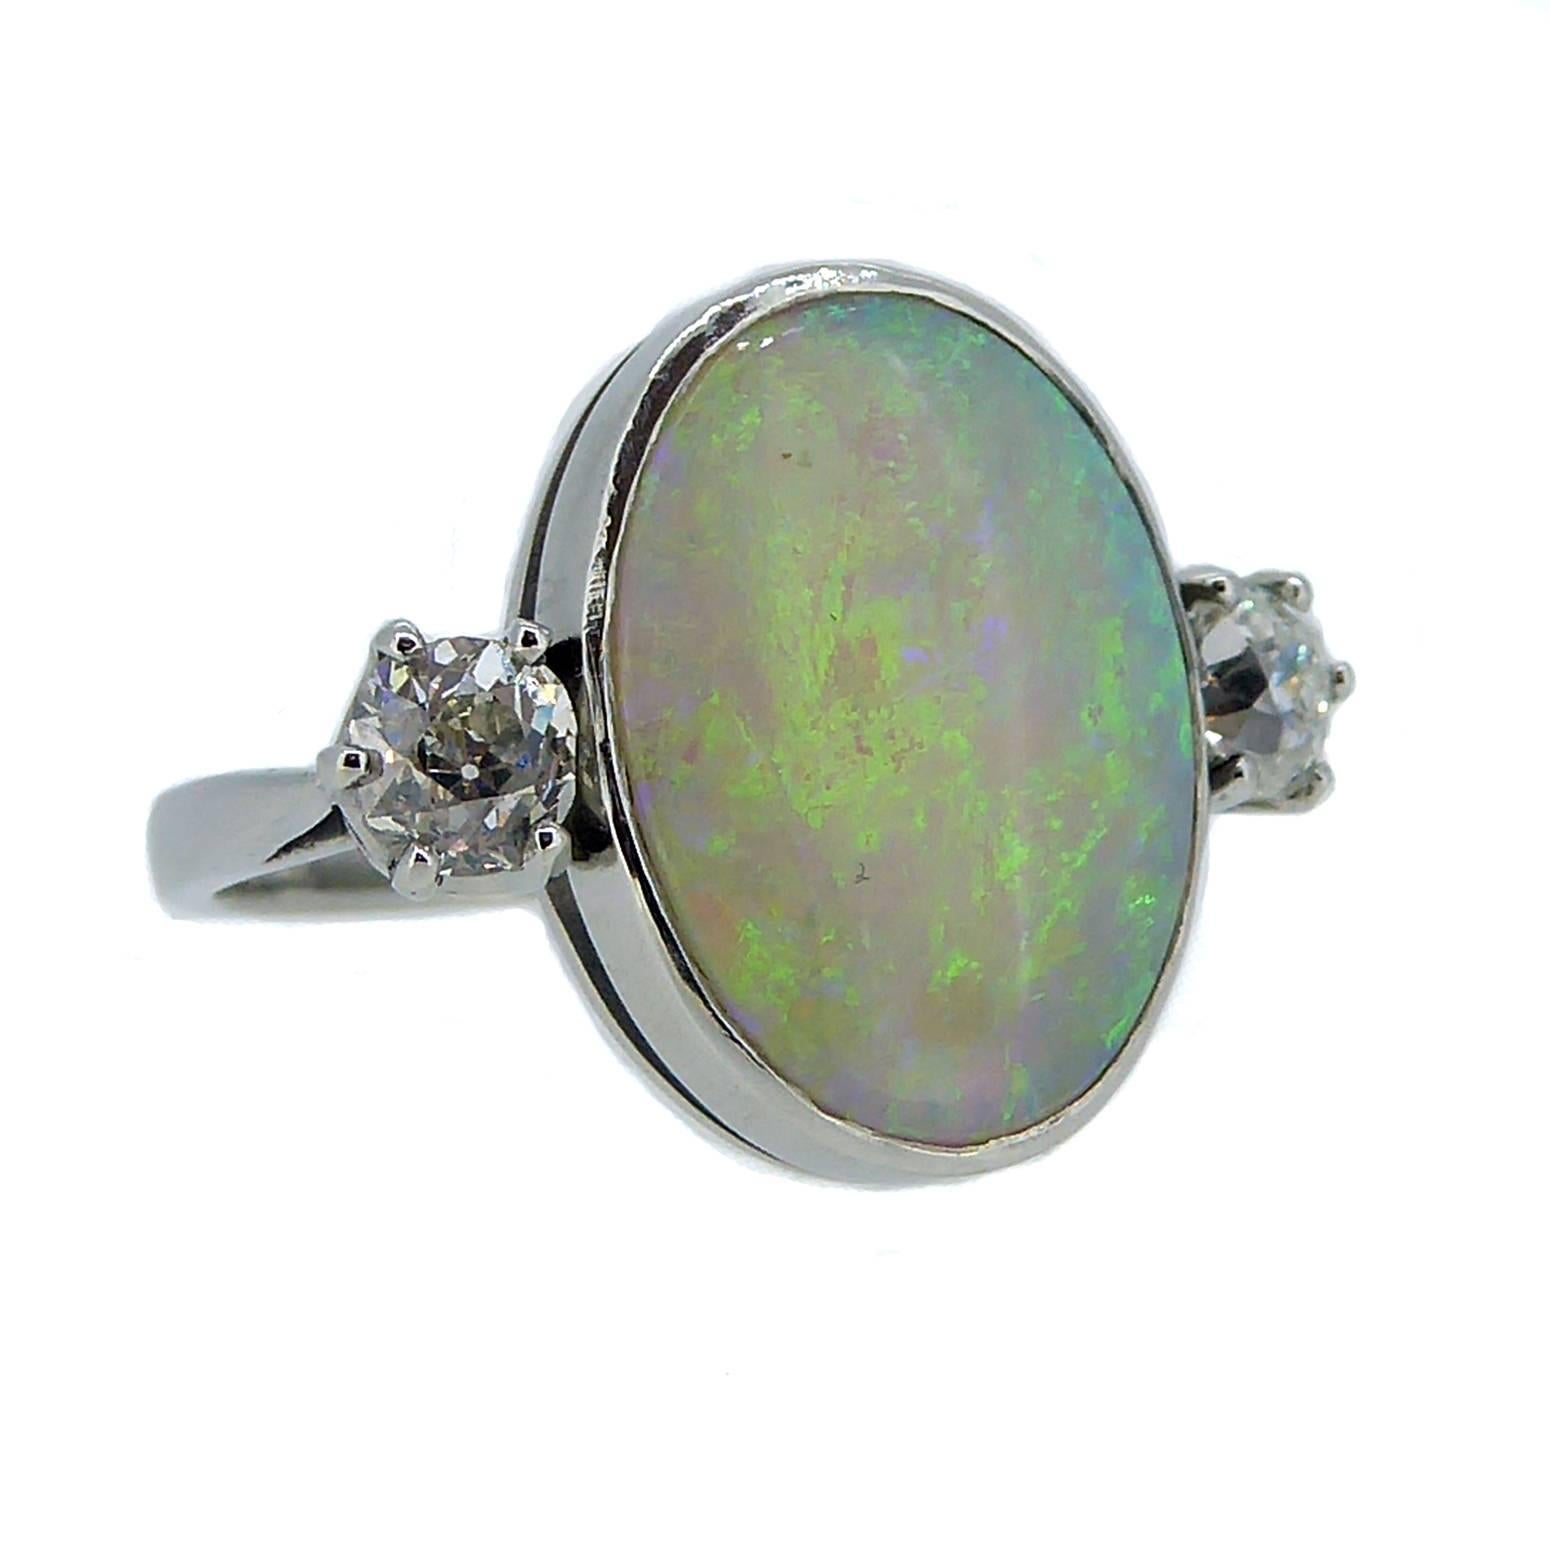 Created by Nicholsons Jewellers utilising antique diamonds and opal, the ring has been modelled in the ever-popular Art Deco style.  Stunning in its simplicity, by using a very plain mount we have allowed the beautiful colour play of the opal to be